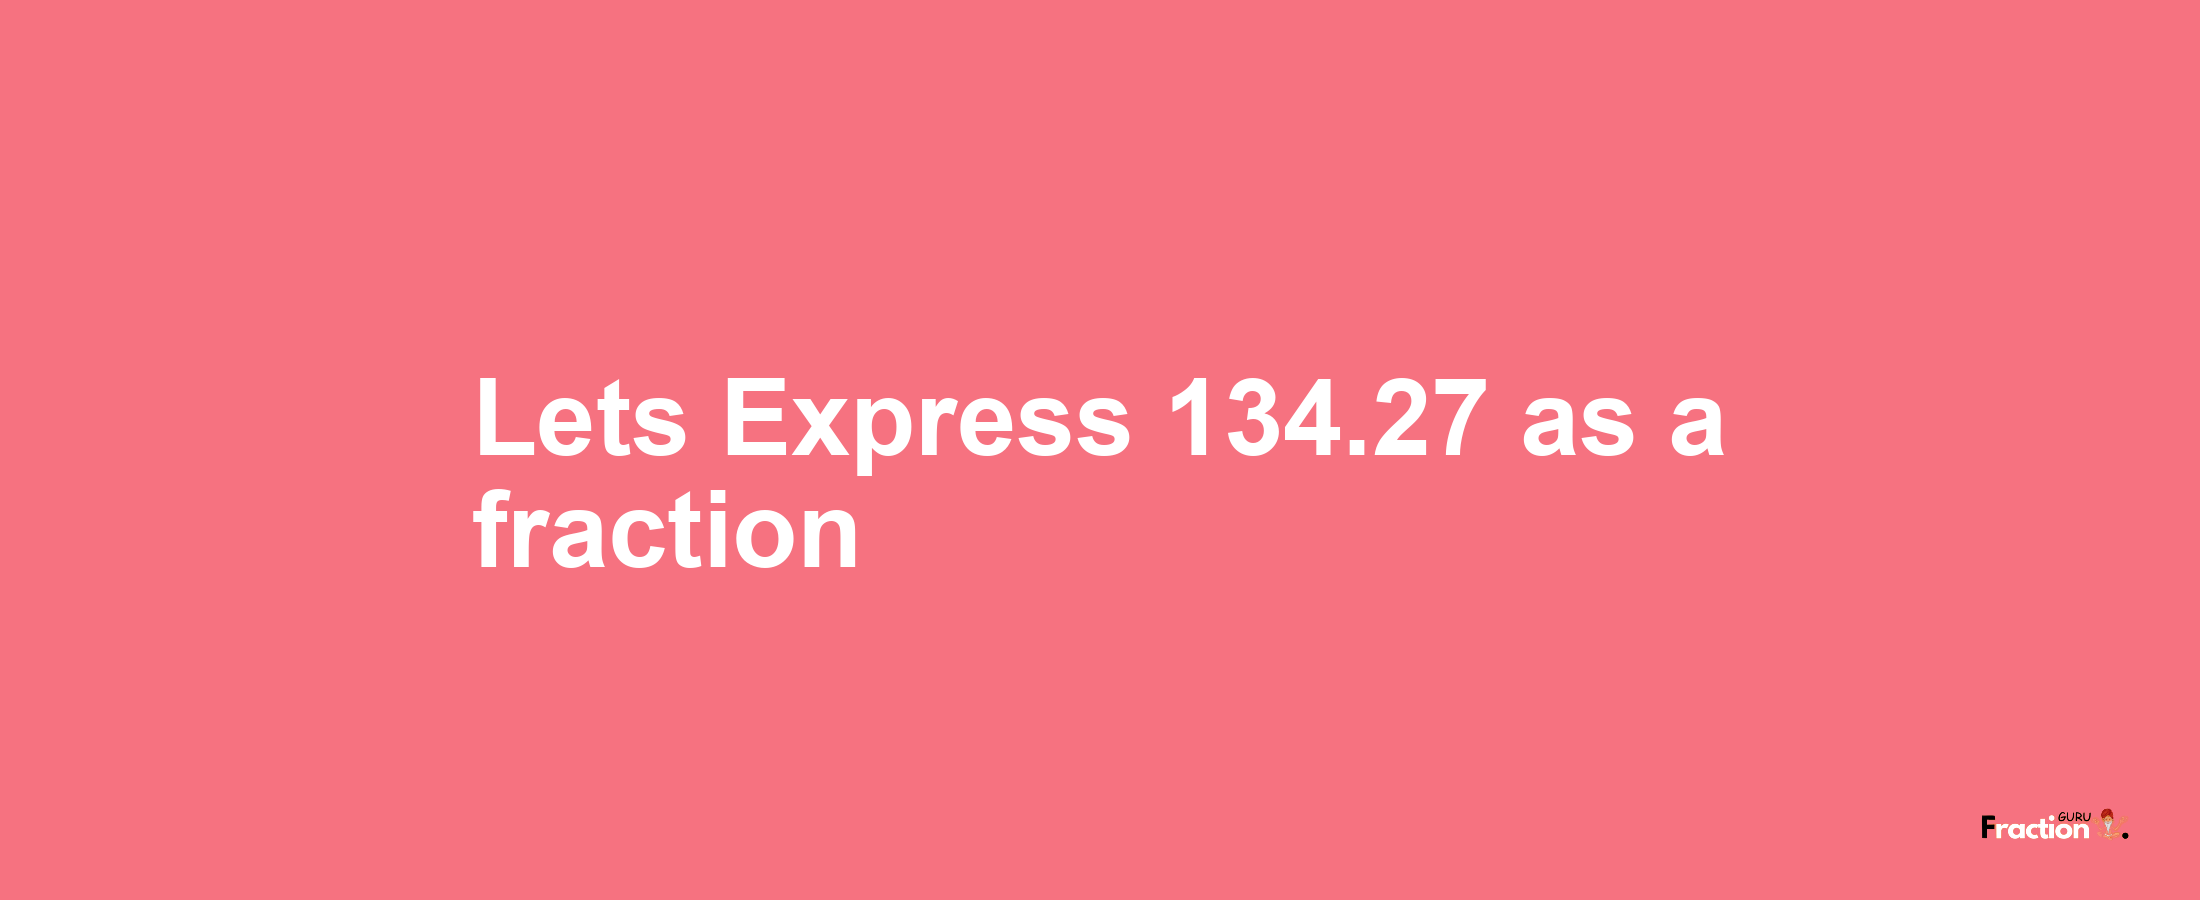 Lets Express 134.27 as afraction